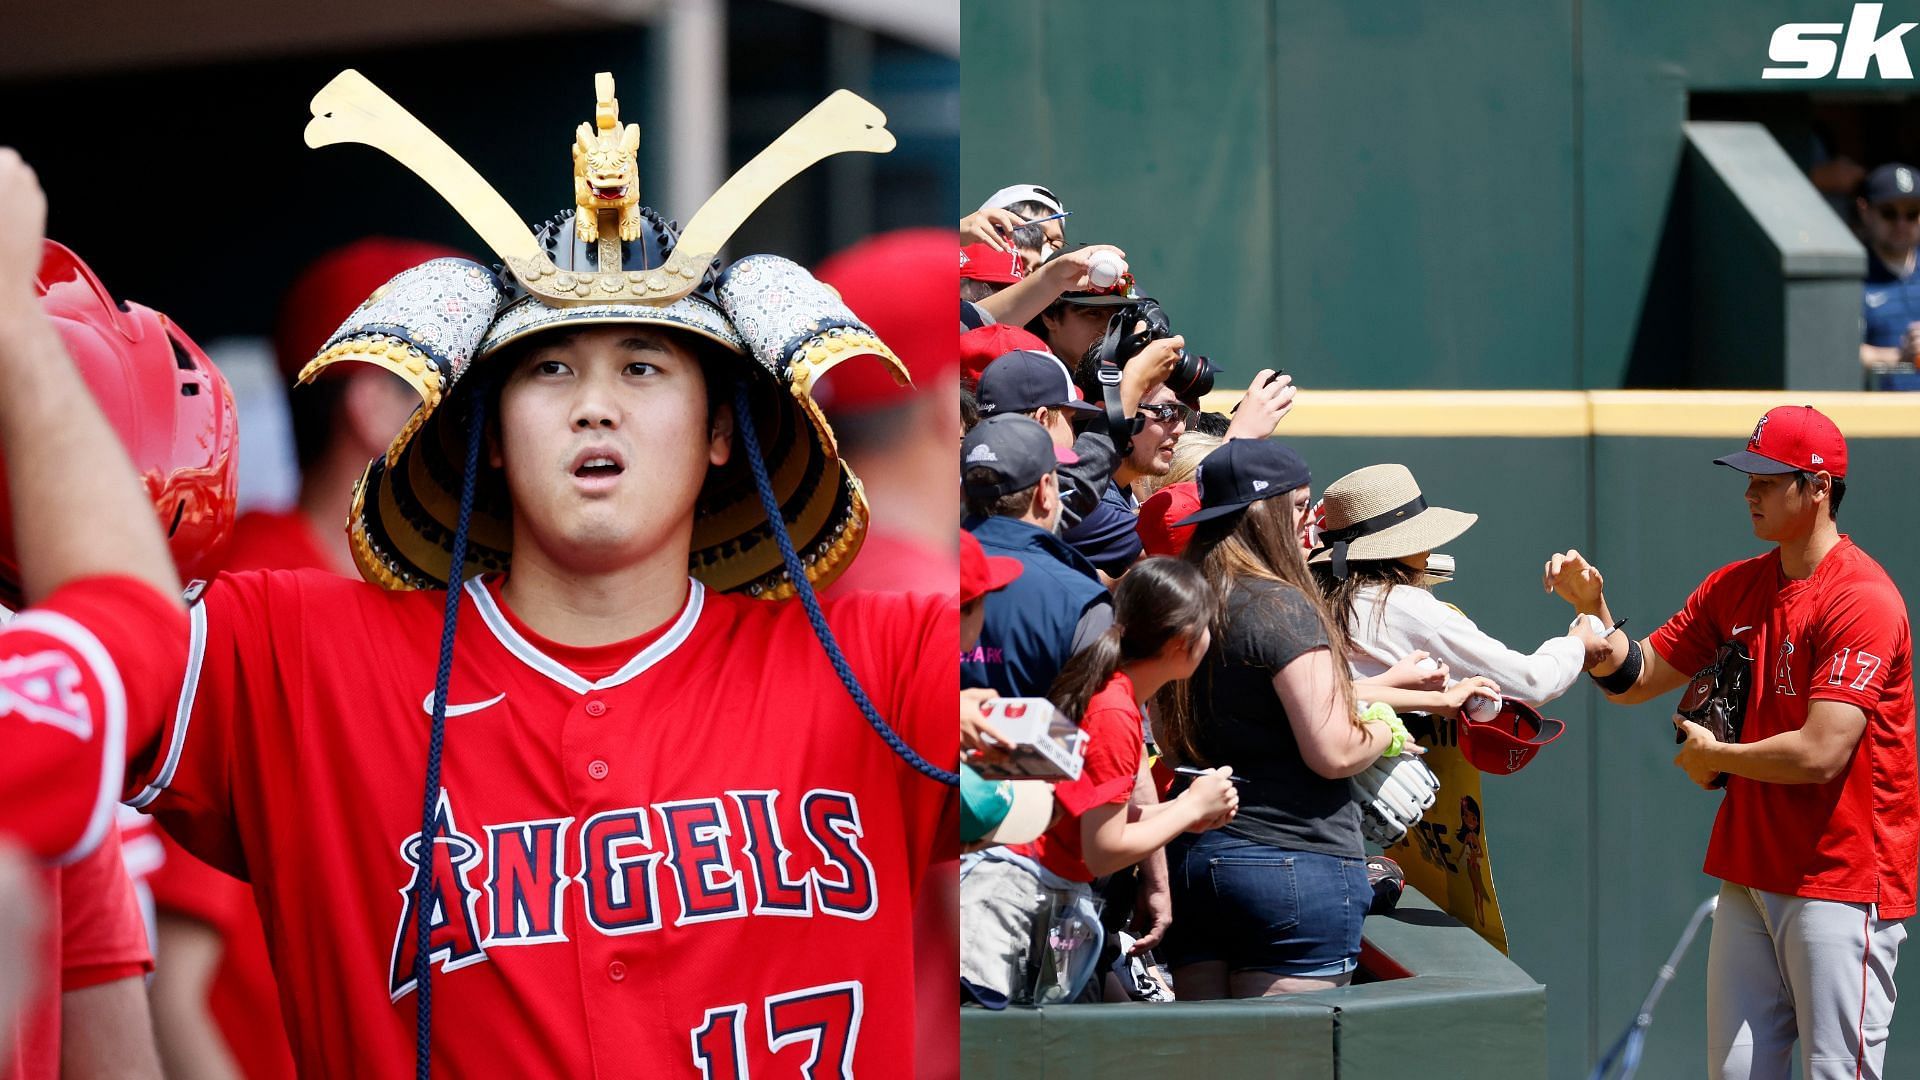 Shohei Ohtani: Angels pull off stunner, win sweepstakes